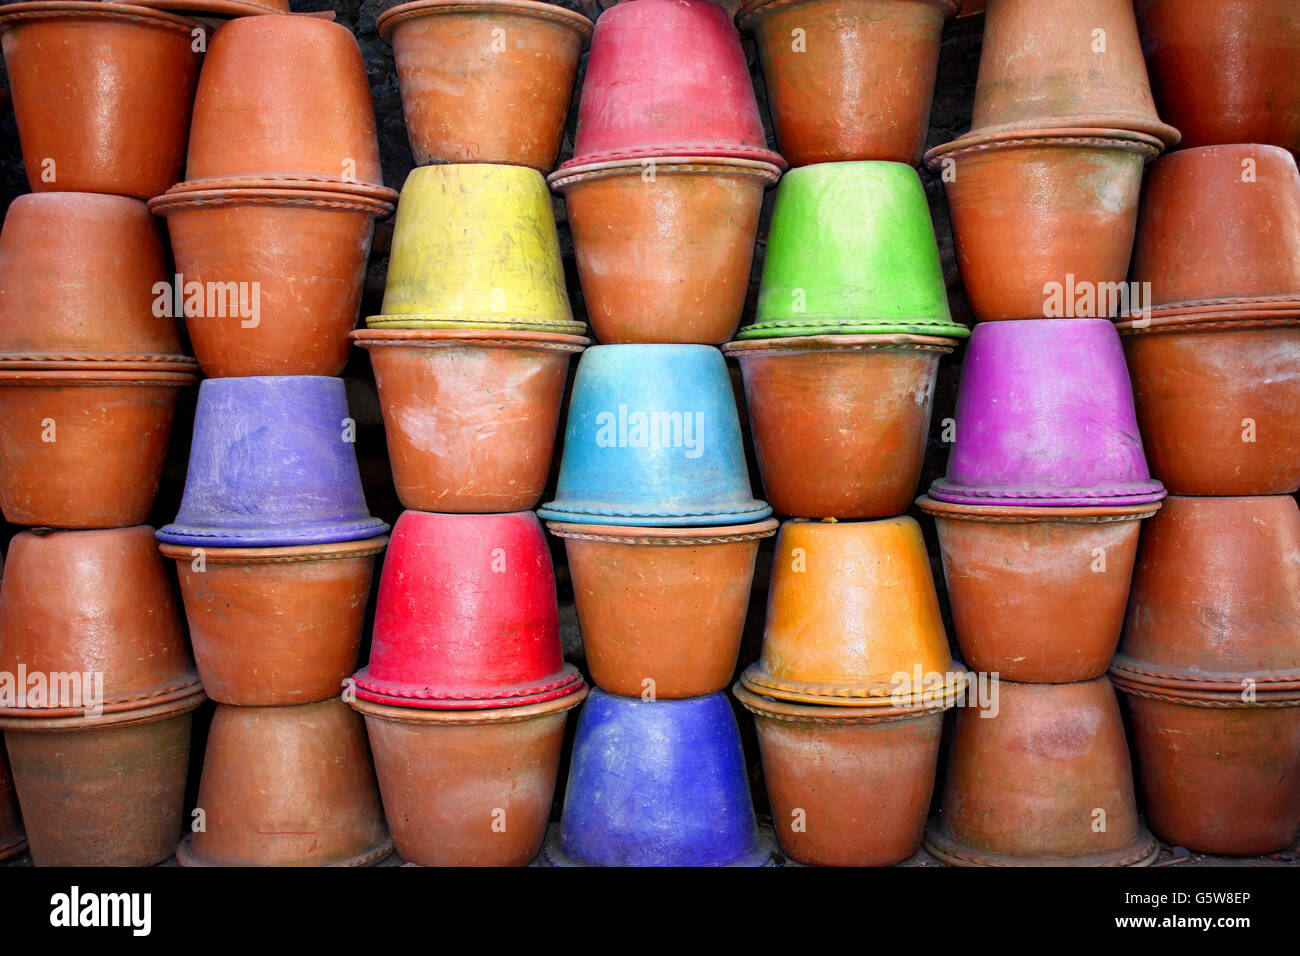 A background of red clay pots with some colored pots in them, for gardening  Stock Photo - Alamy